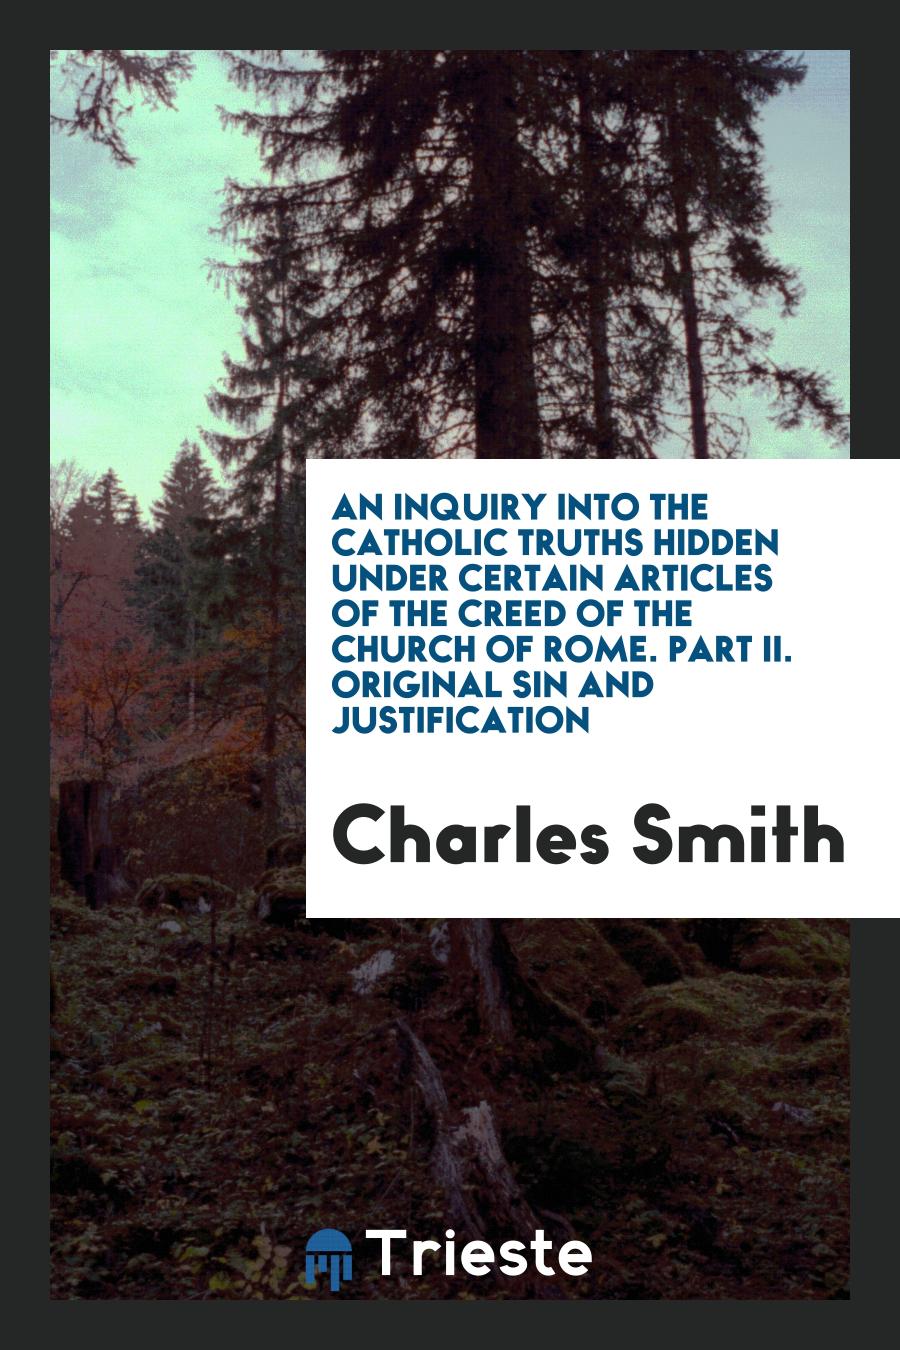 An Inquiry into the Catholic Truths Hidden under Certain Articles of the Creed of the Church of Rome. Part II. Original Sin and Justification